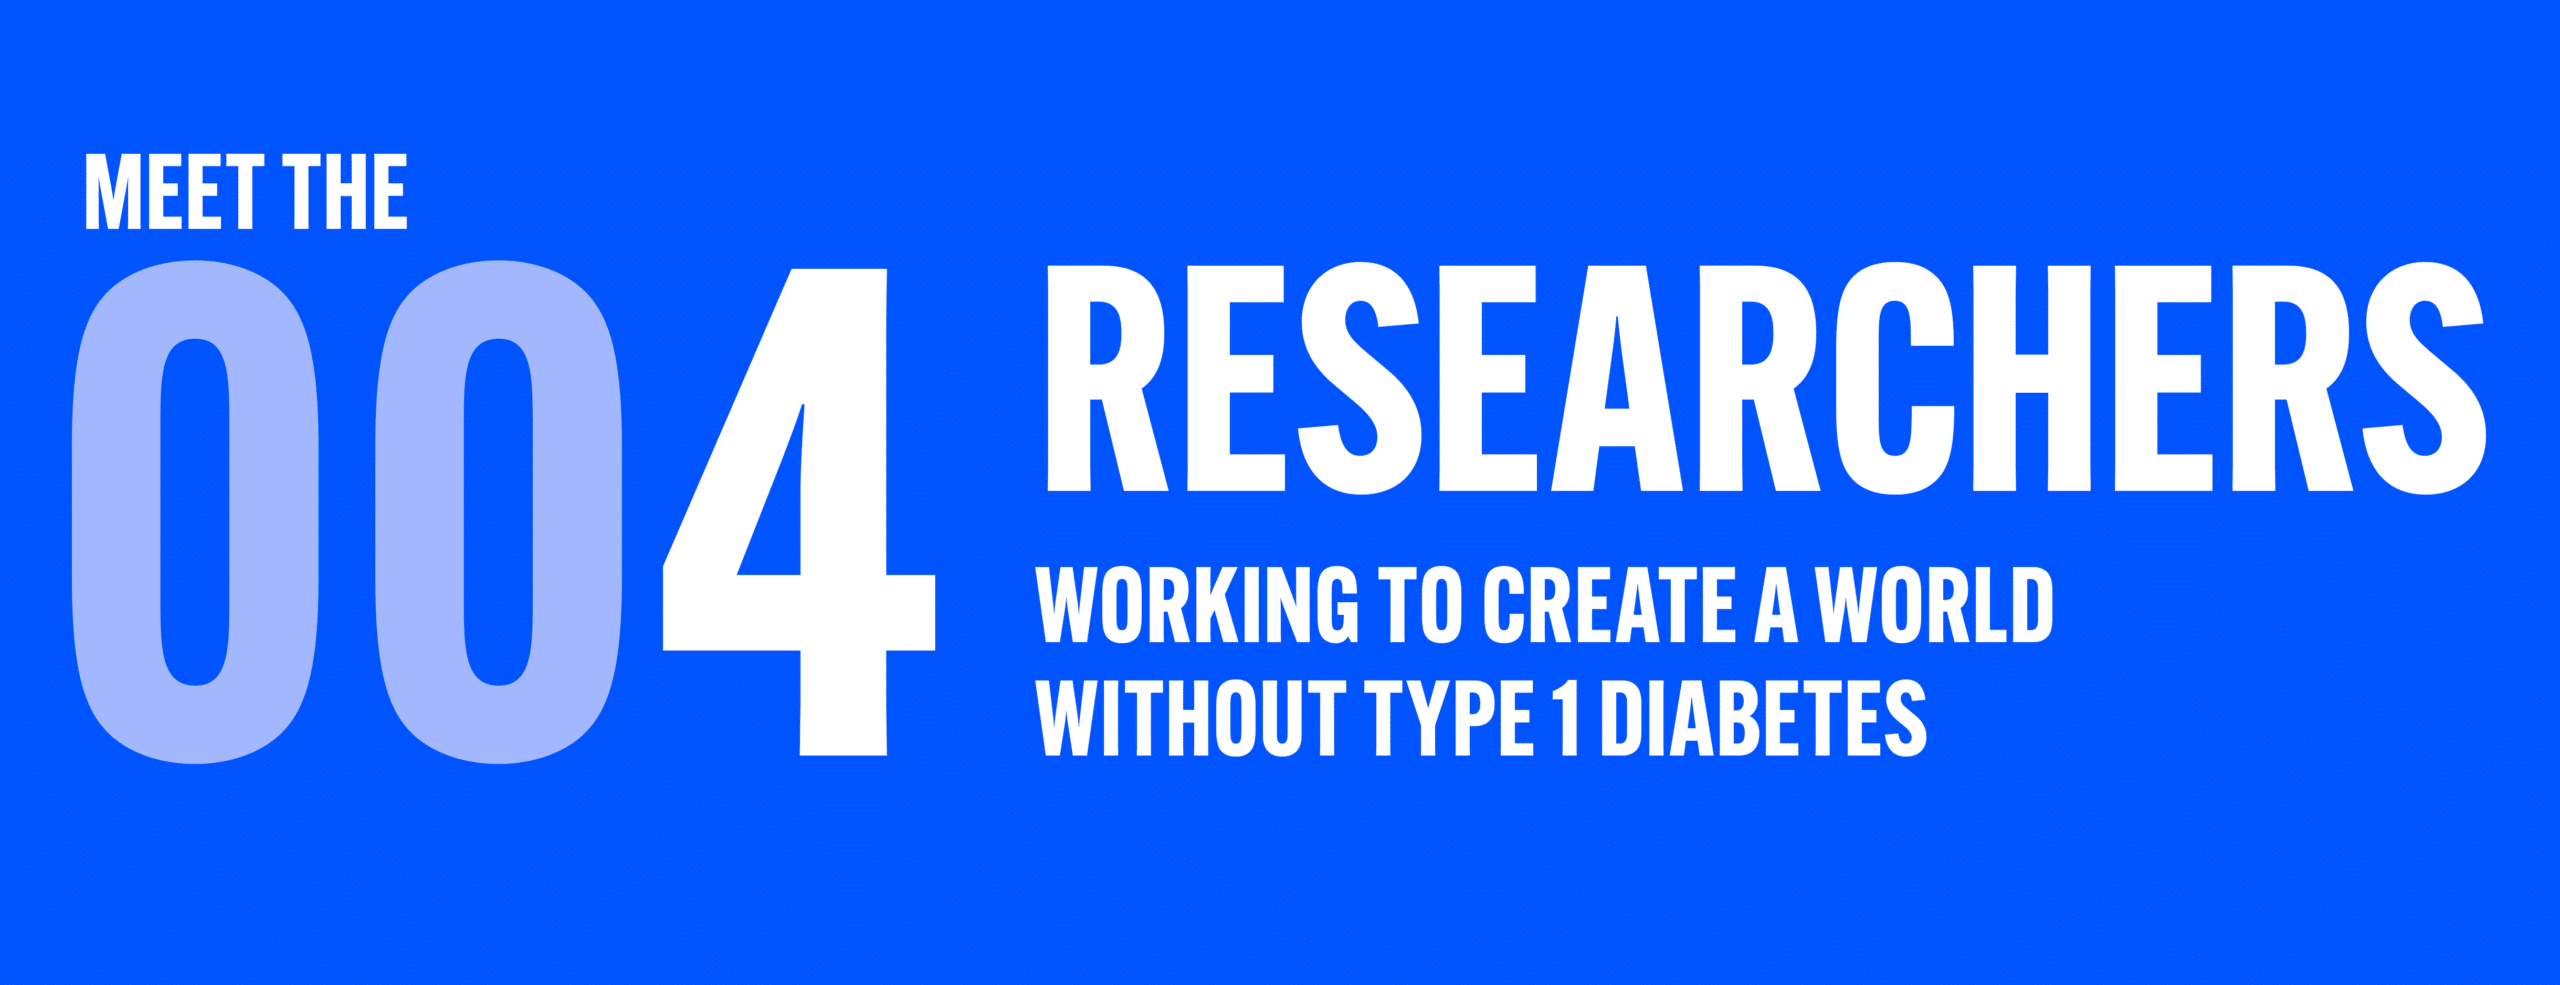 Meet four of the researchers working to create a world without type 1 diabetes